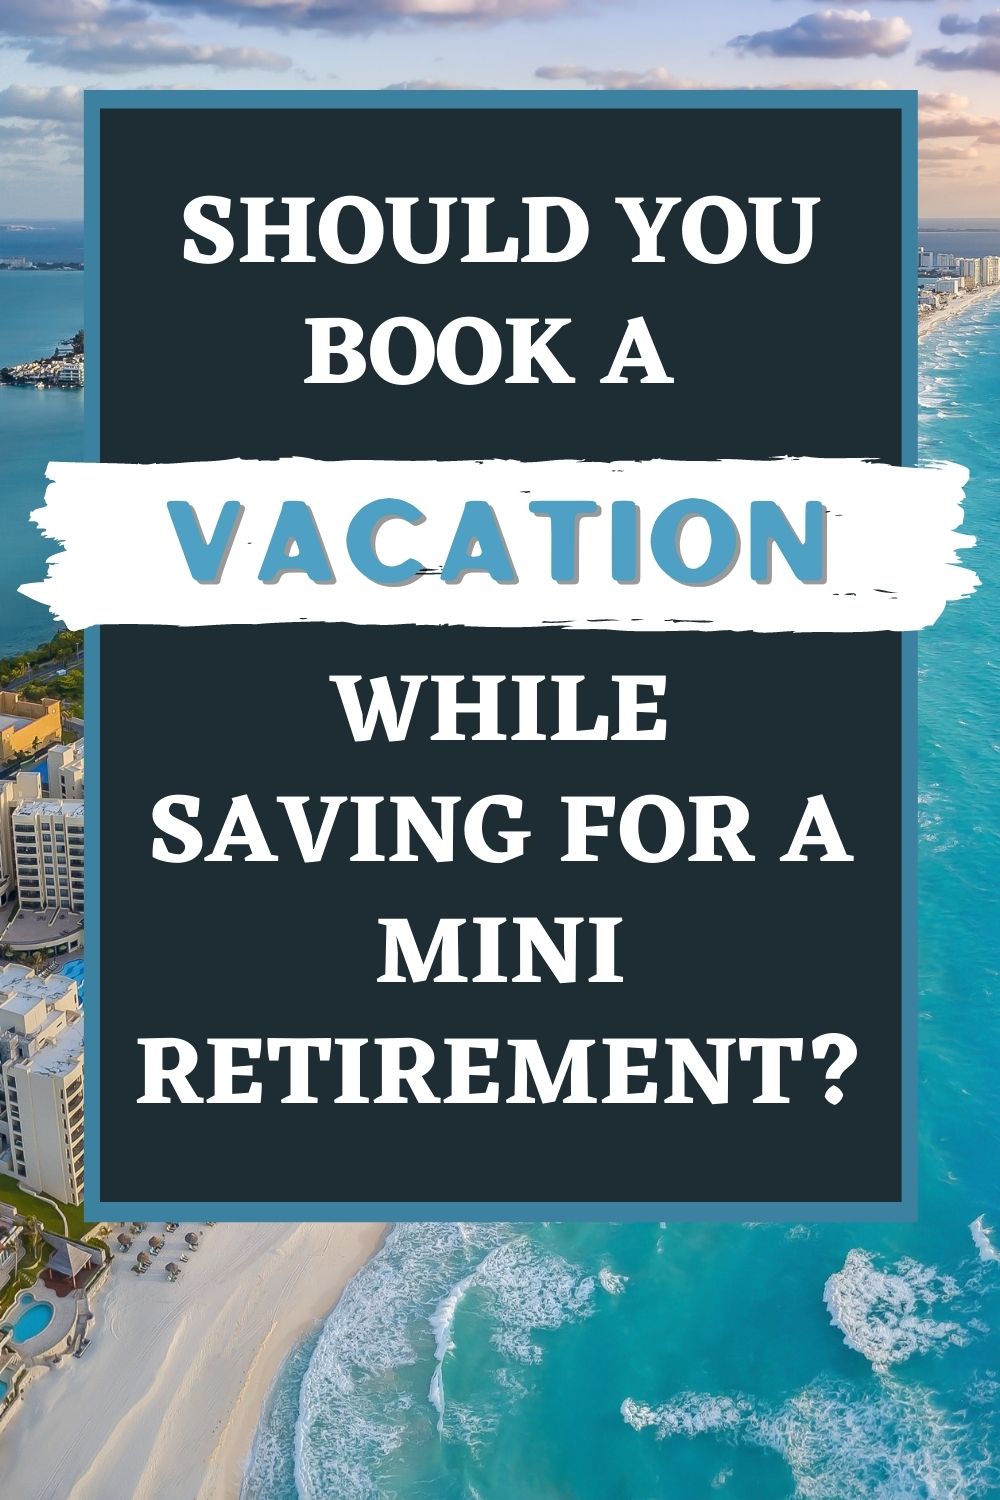 Taking a Vacation While Saving for Mini Retirement?